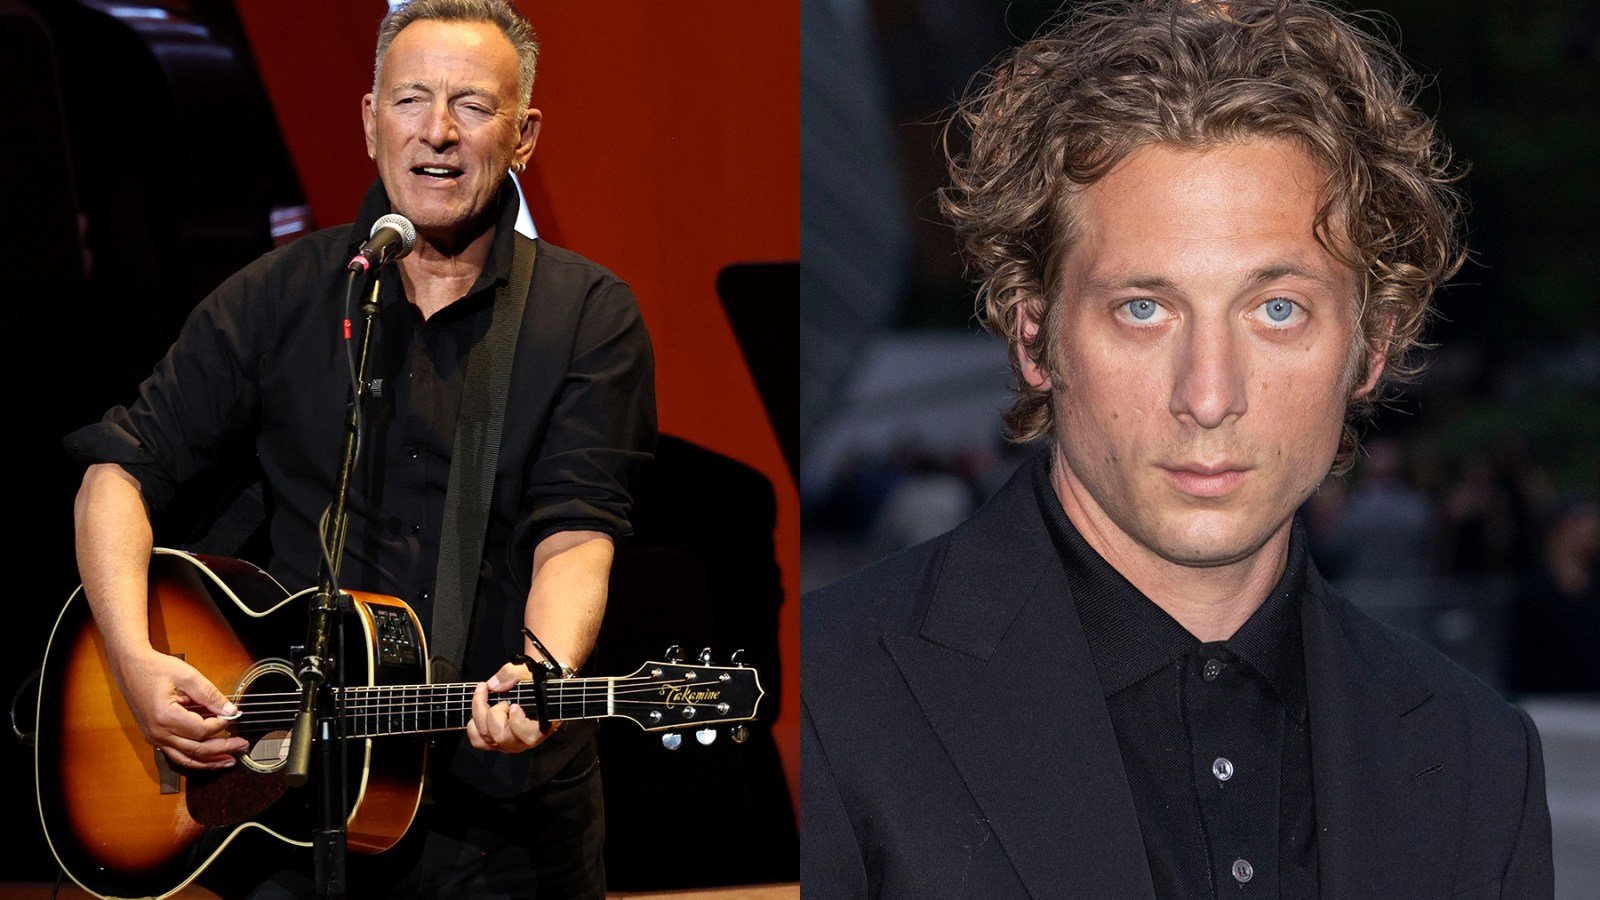 Jeremy Allen White Says He and Bruce Springsteen Have ‘Texted’ Ahead of Biopic Portrayal